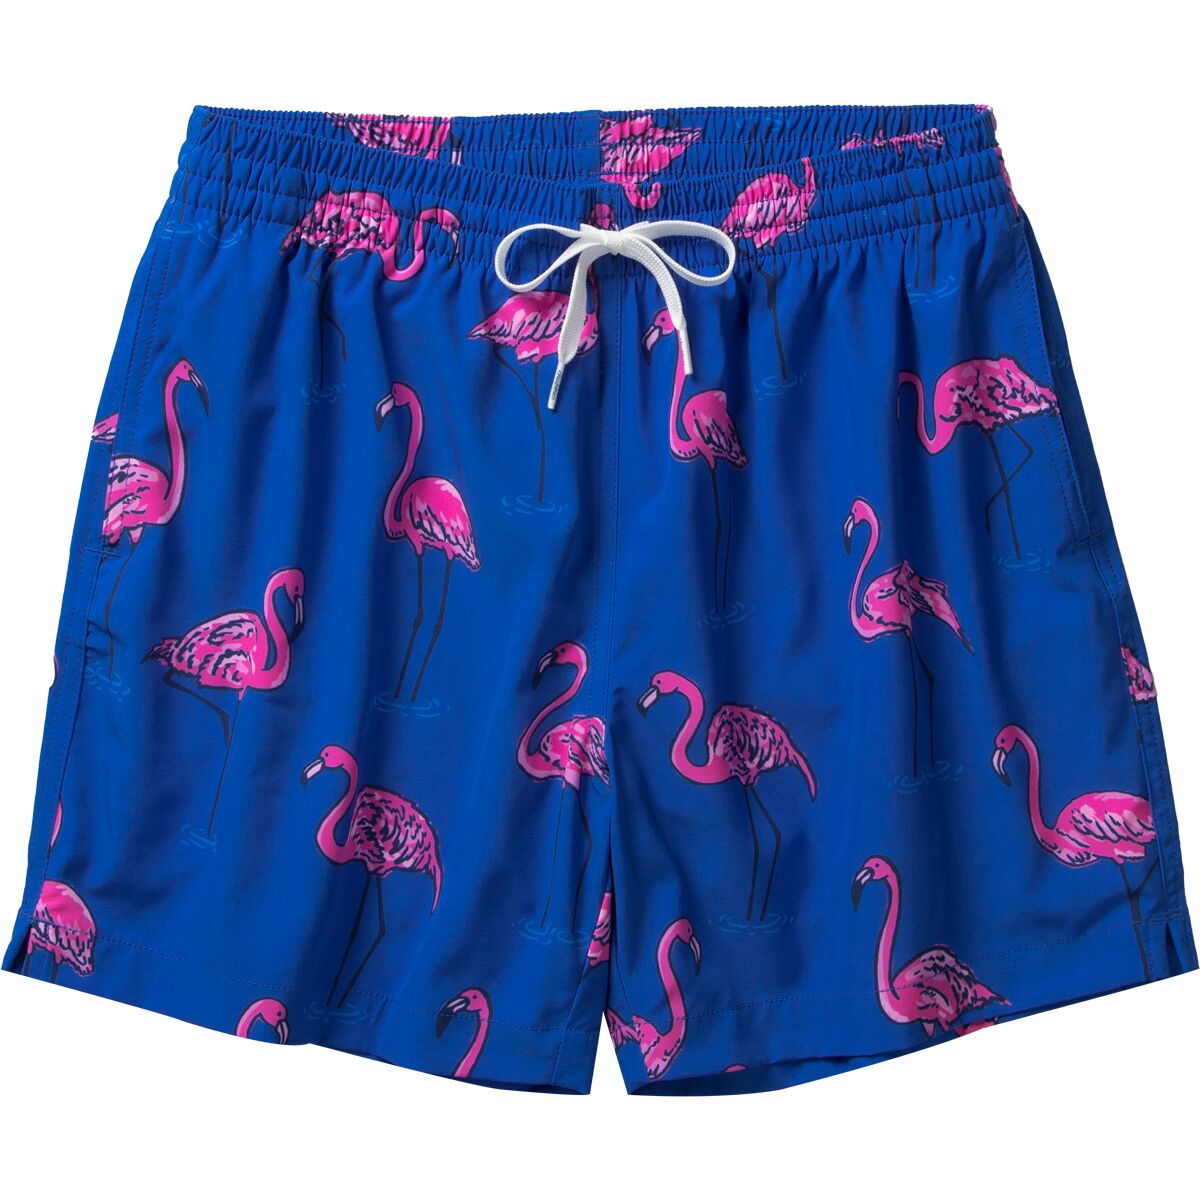 Chubbies The Pop Flock and Drop Its 5.5in Swim Trunk - Men's